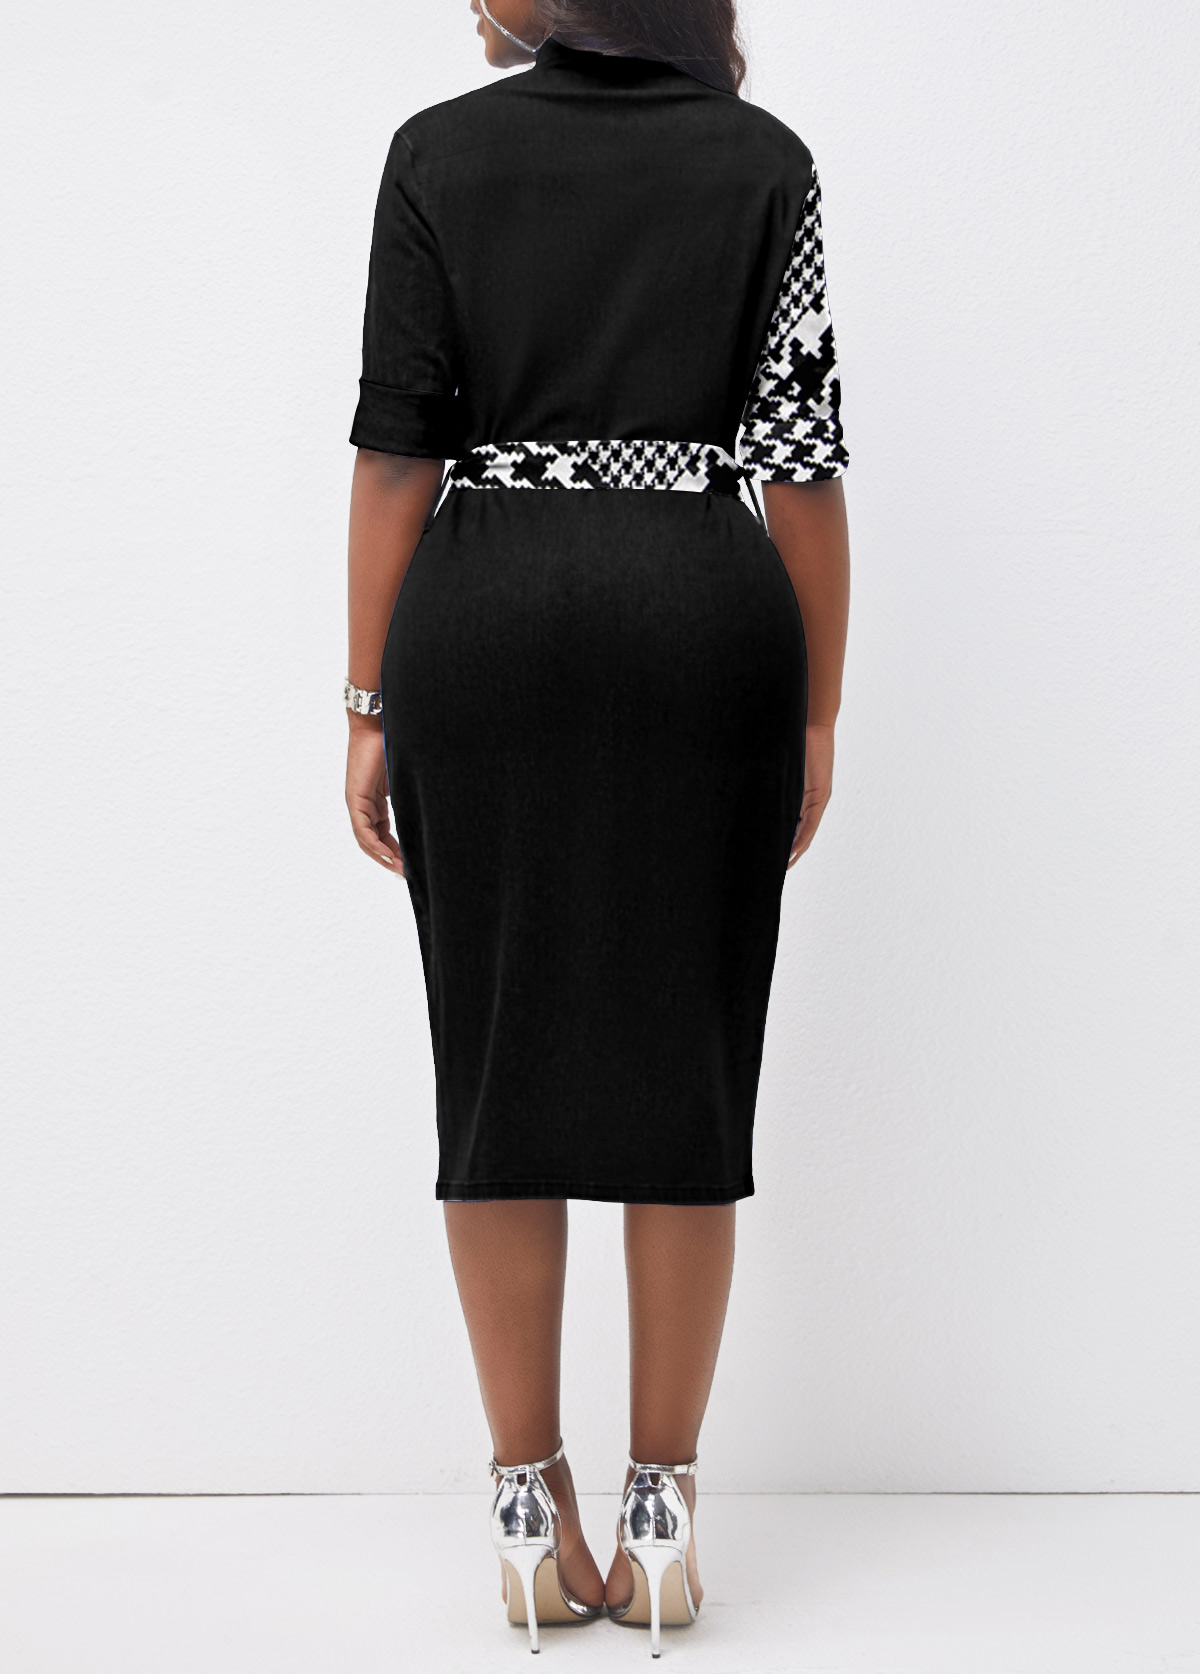 Houndstooth Print Button Belted Black Bodycon Dress